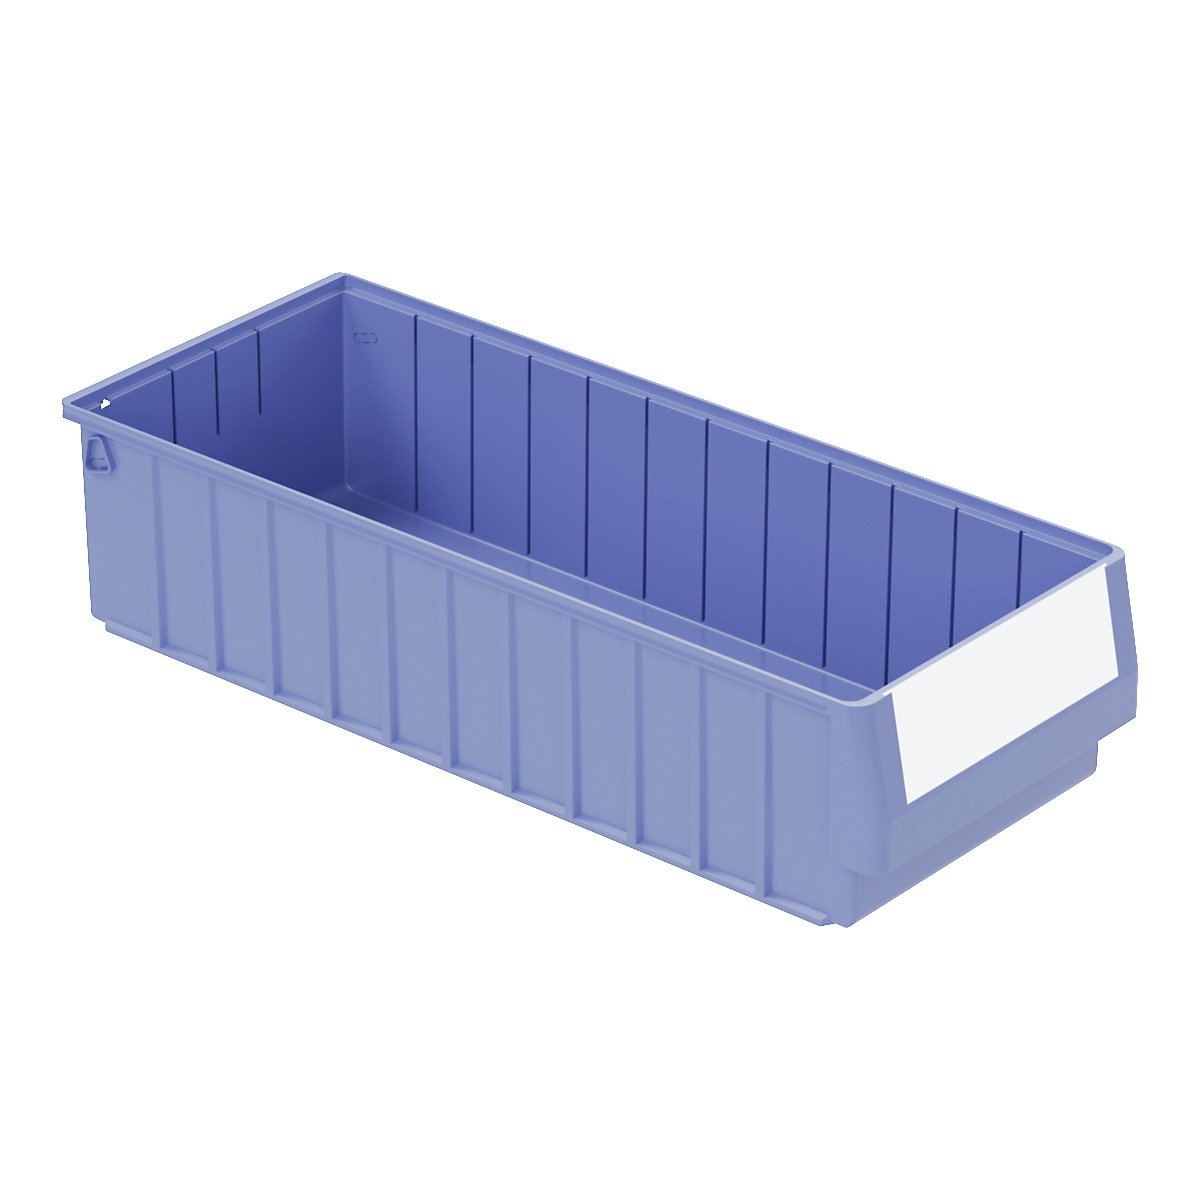 Shelf bin – BITO, made of PP, LxWxH 600 x 234 x 140 mm, pack of 6-9